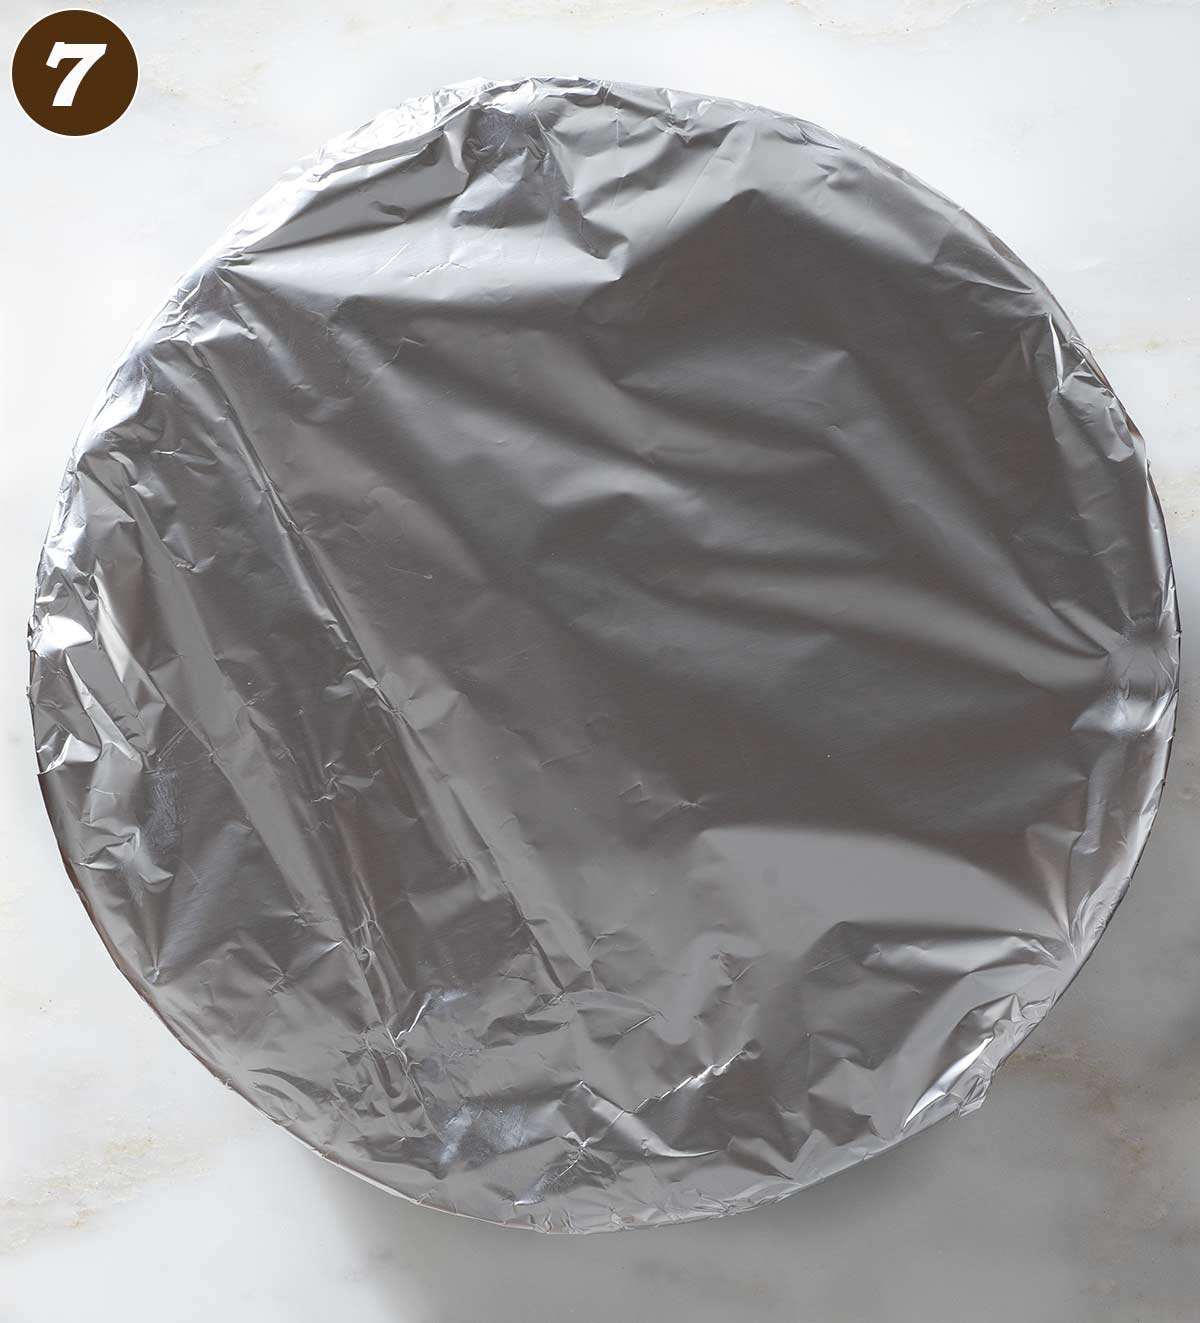 A baking dish covered with aluminum foil.